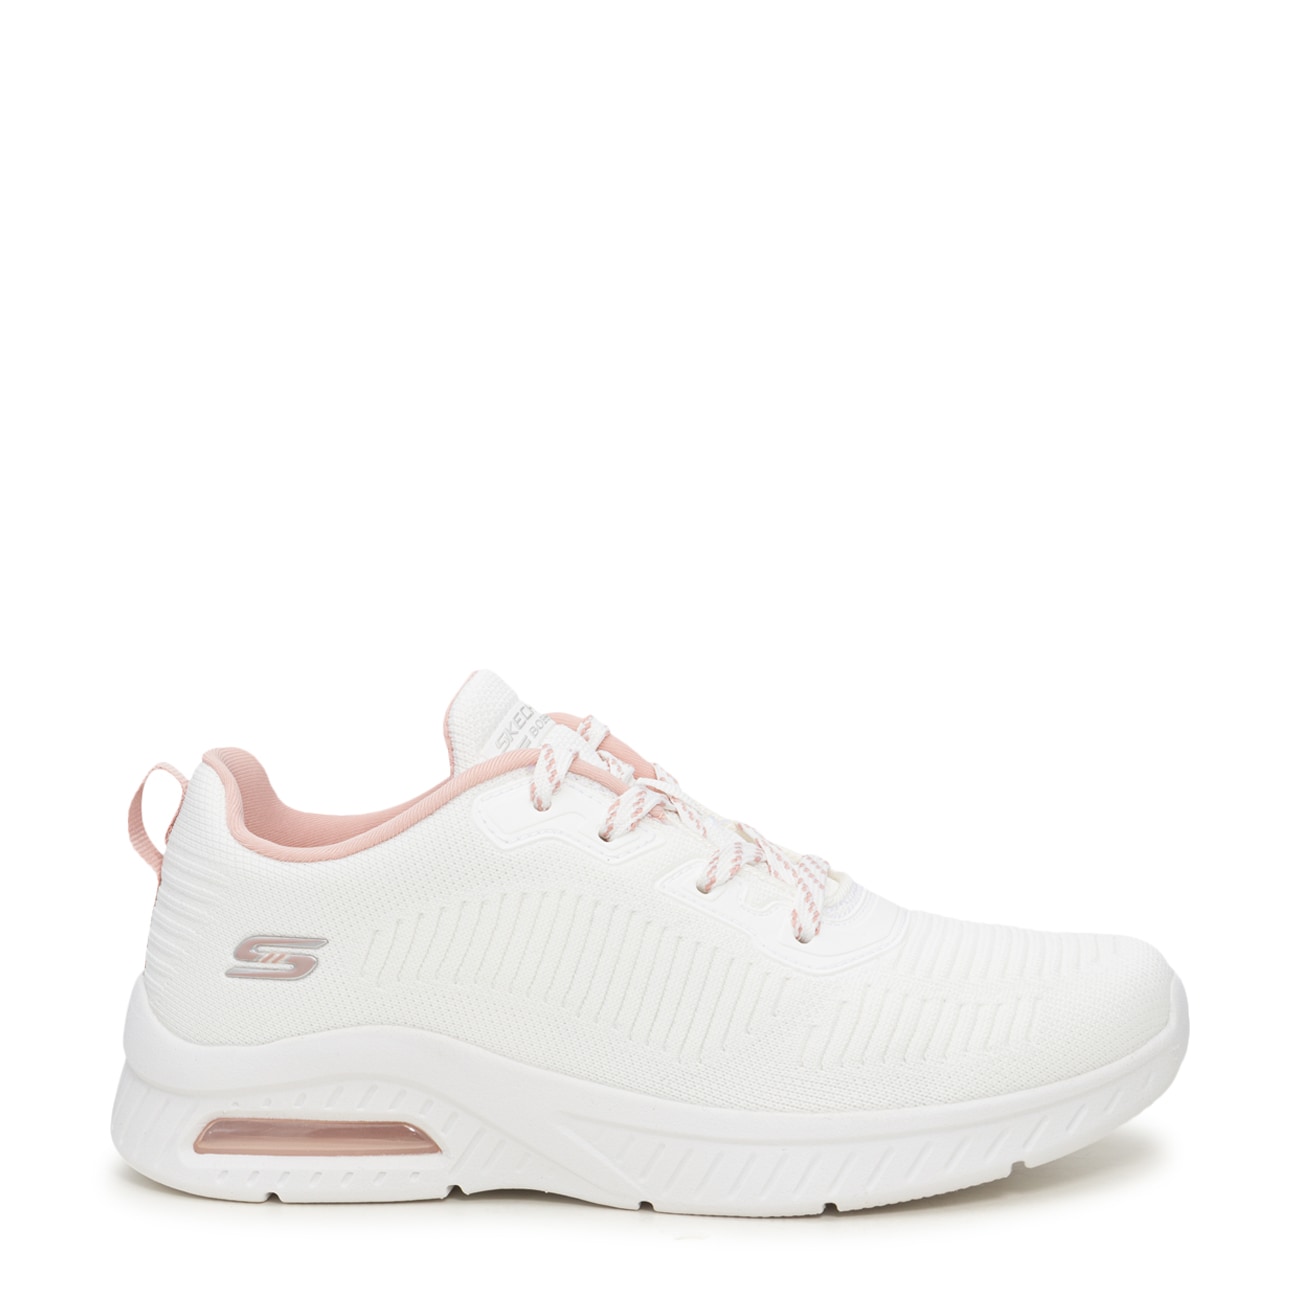 Skechers BOBS Squad Air Sweet Encounter | The Shoe Company